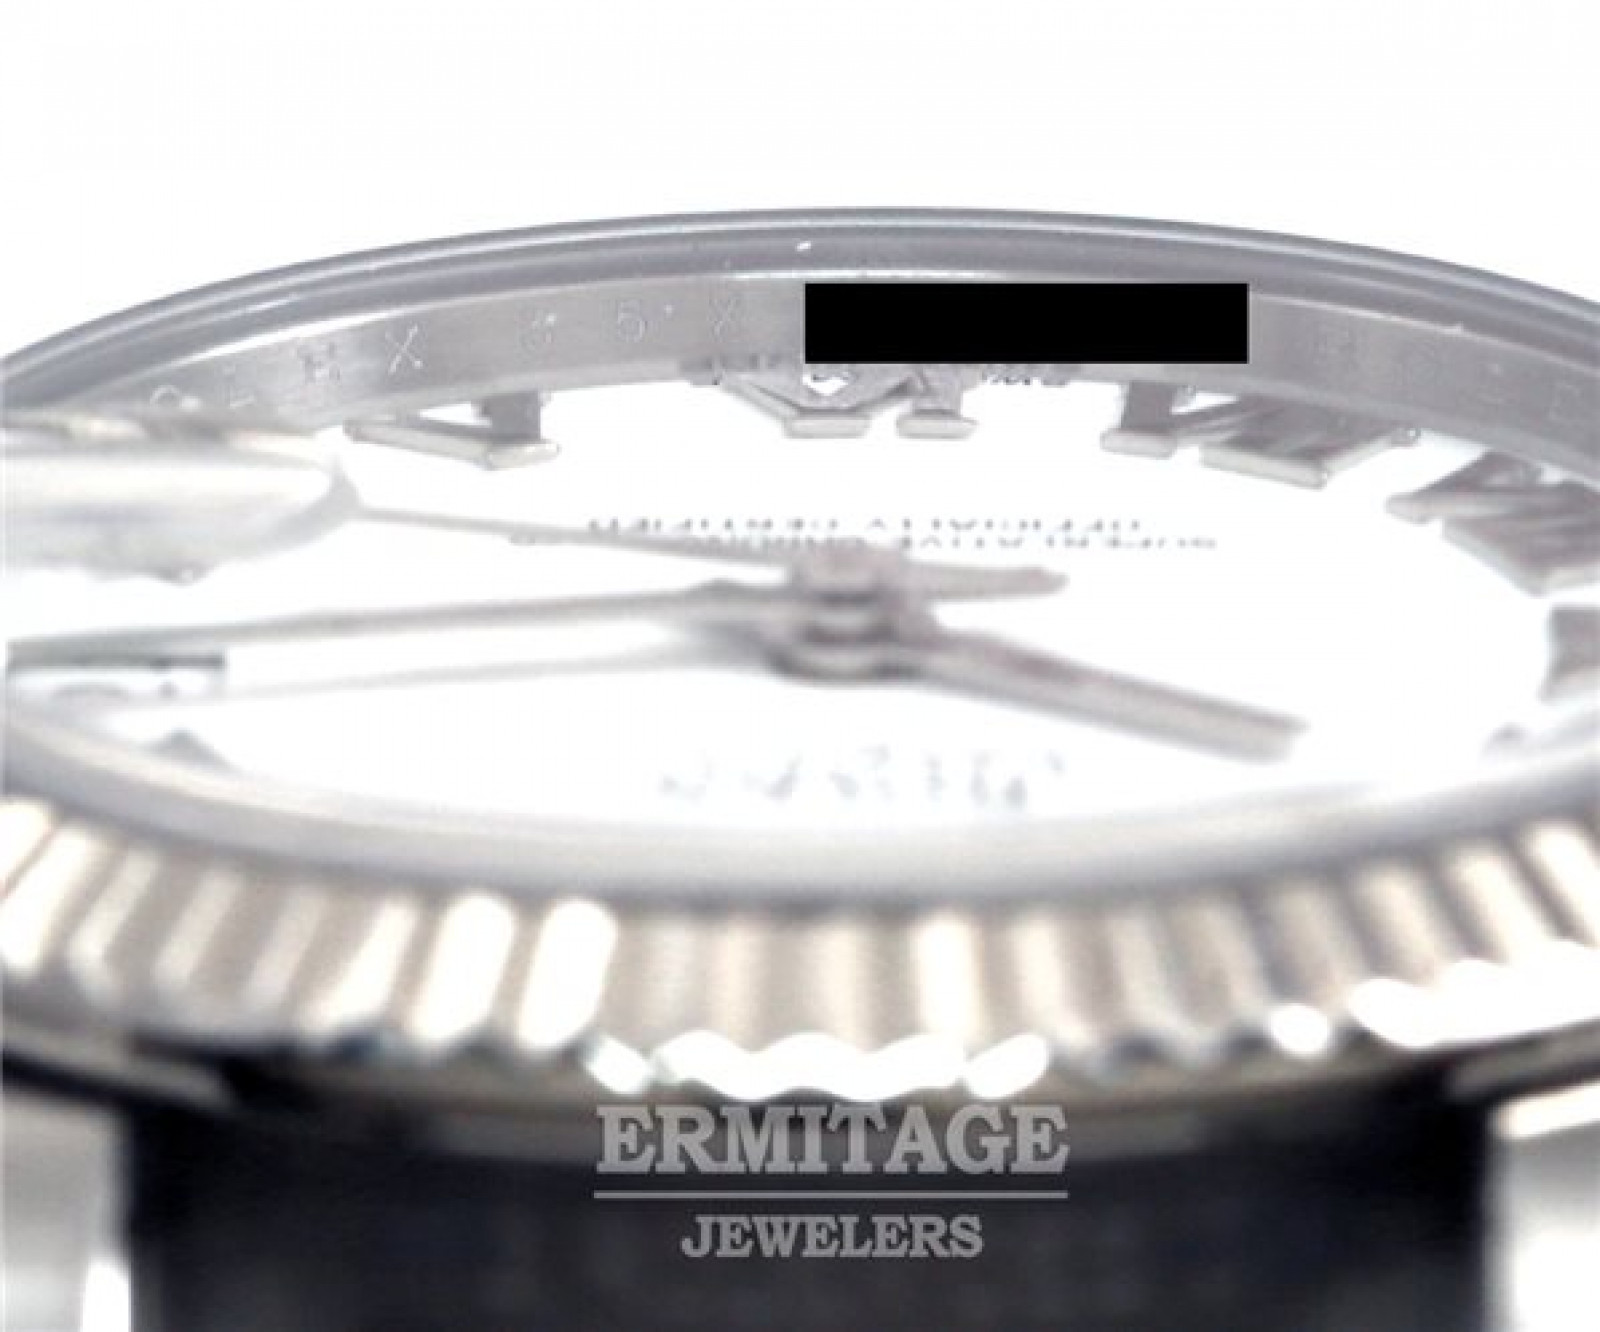 Rolex Datejust 178274 Steel with White Dial & Roman Markers